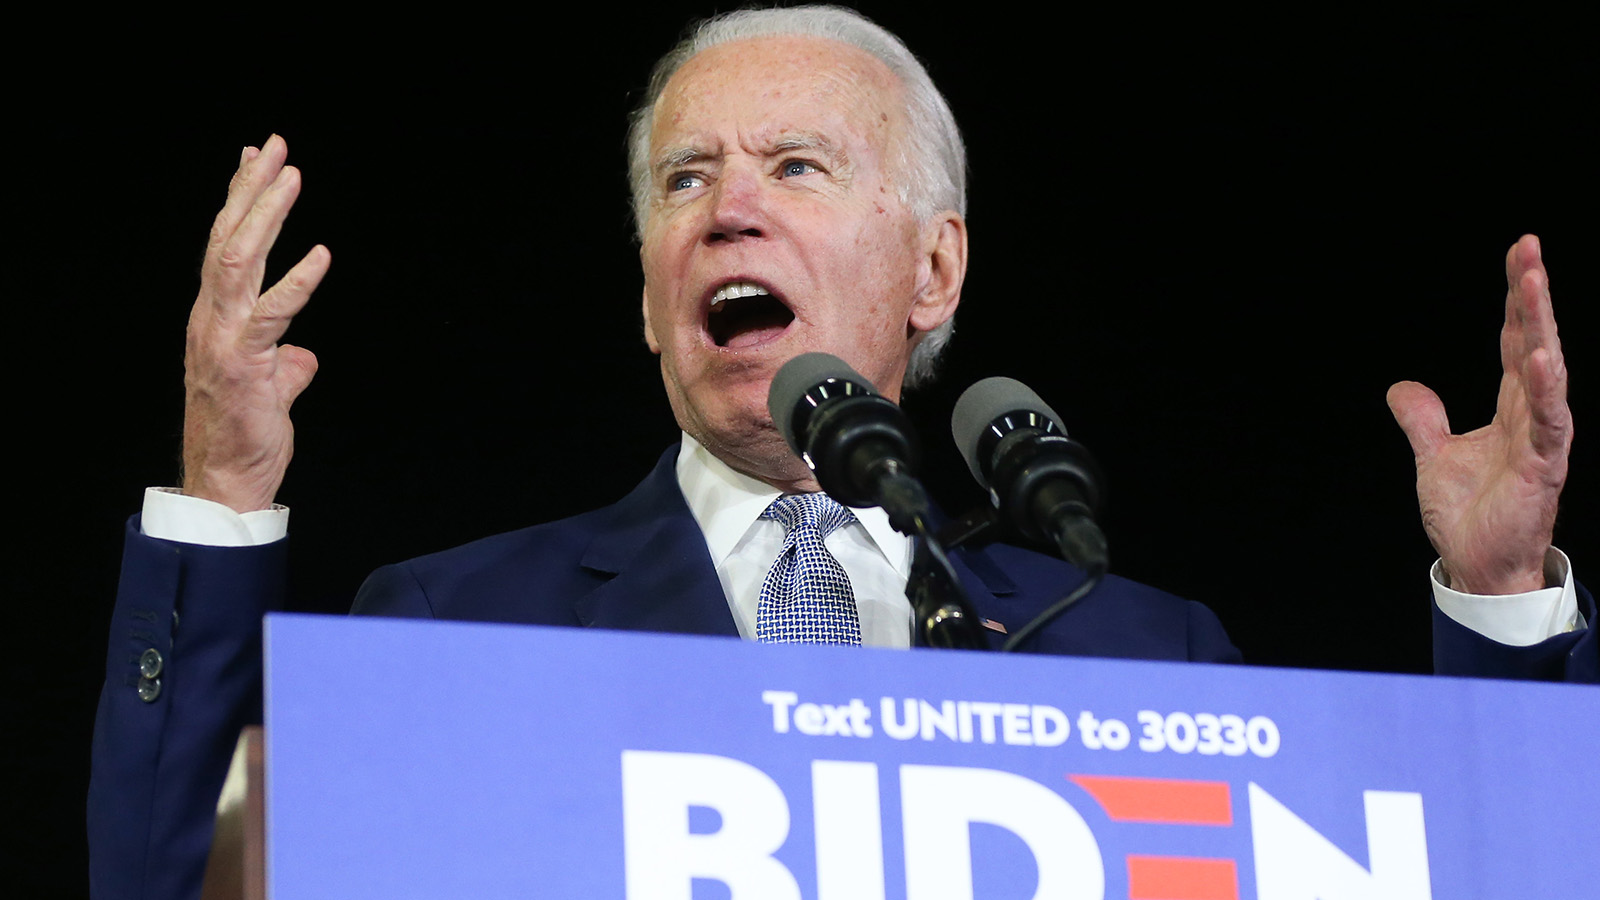 Democratic presidential candidate former Vice President Joe Biden speaks at a Super Tuesday campaign event at Baldwin Hills Recreation Center on March 3, 2020 in Los Angeles.